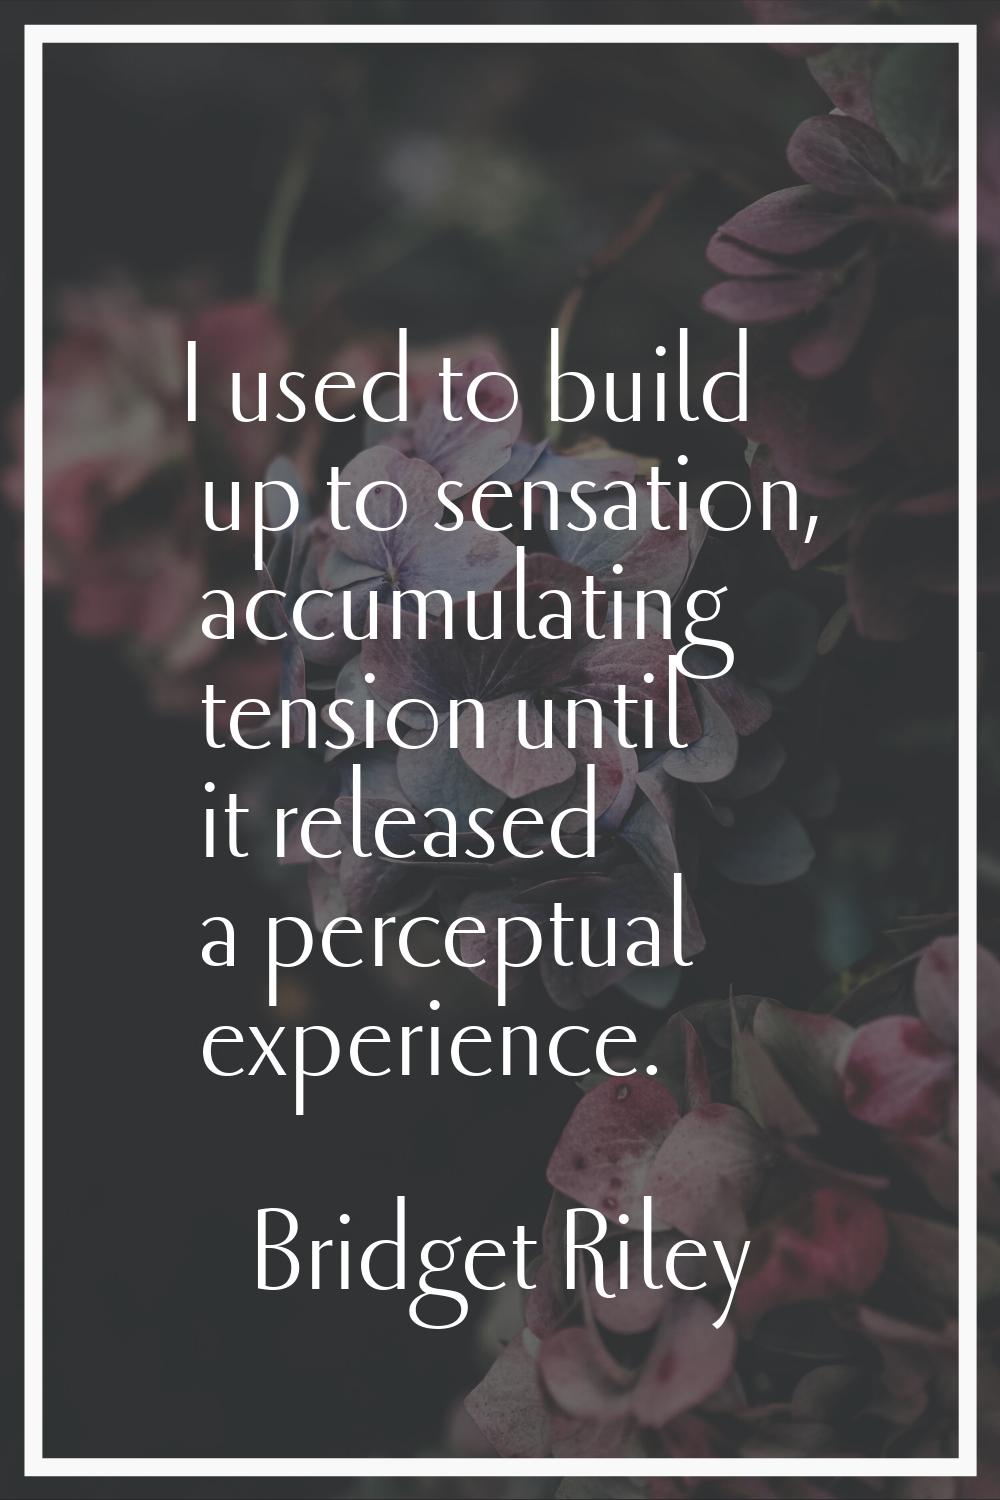 I used to build up to sensation, accumulating tension until it released a perceptual experience.